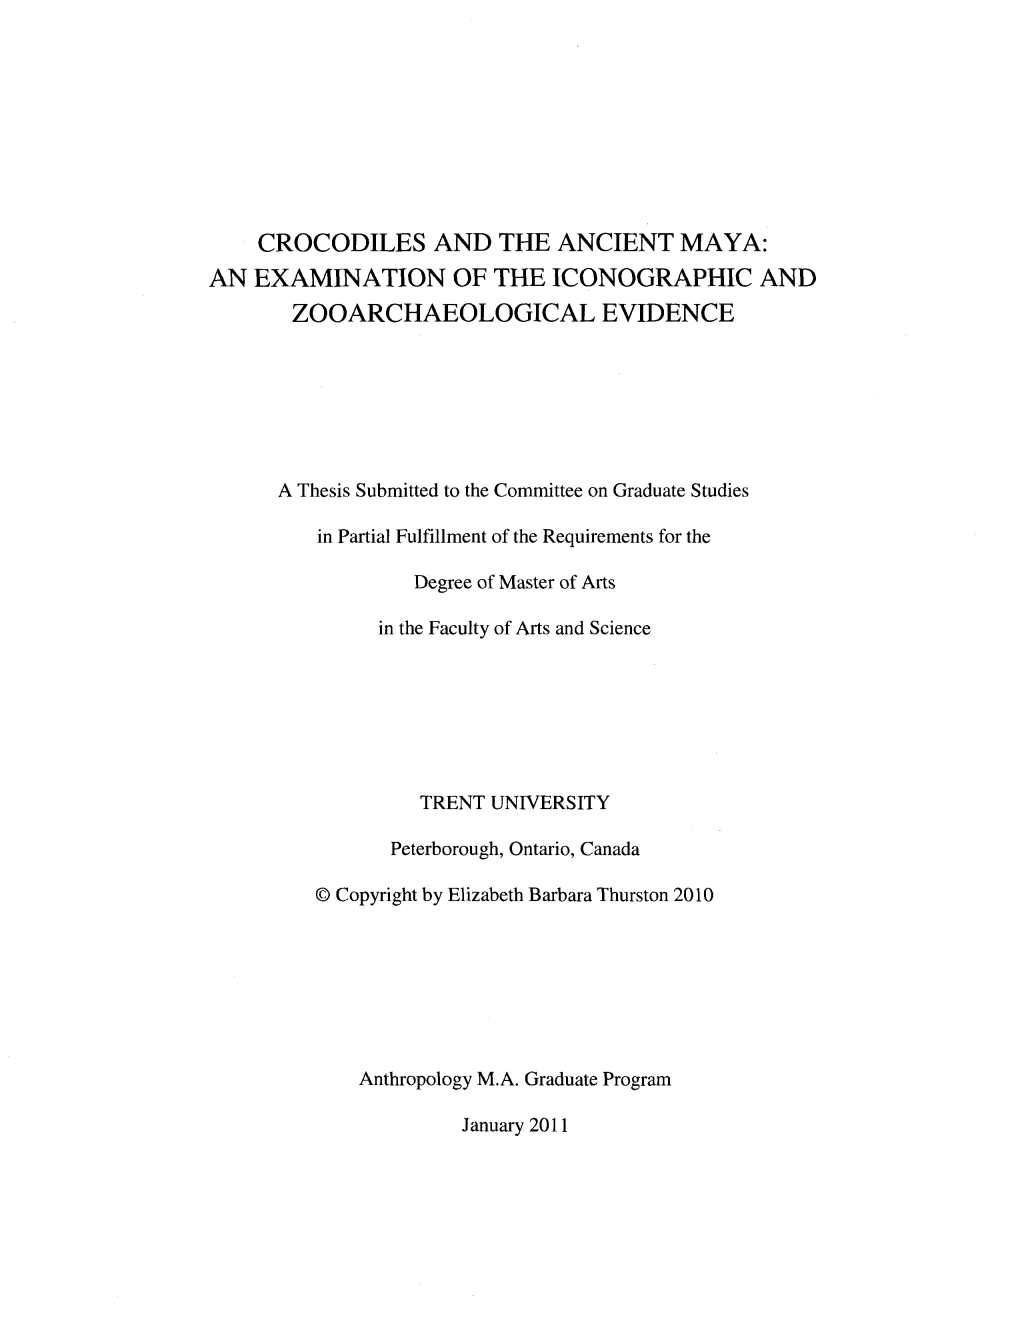 Crocodiles and the Ancient Maya: an Examination of the Iconographic and Zooarchaeological Evidence